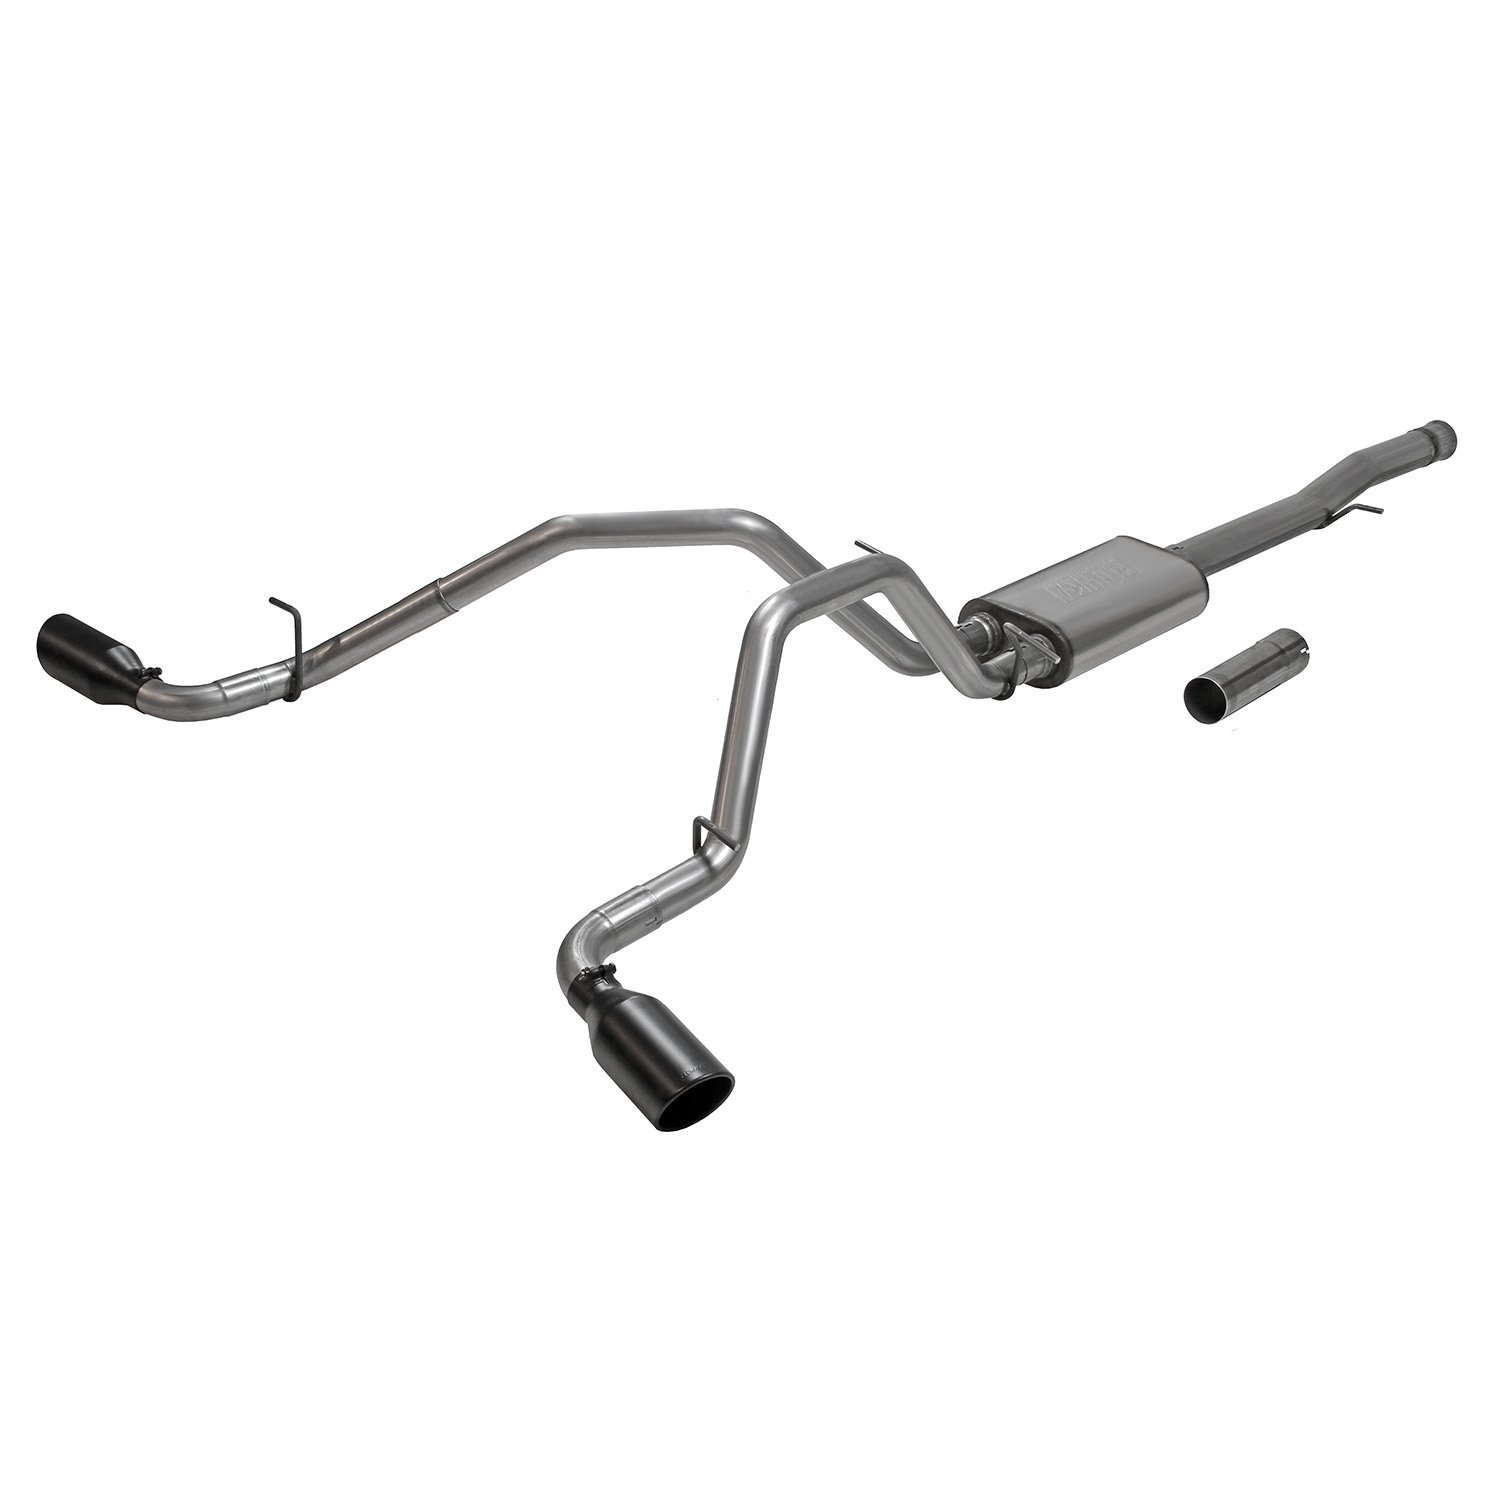 FlowFX Cat-Back Exhaust System Fits 2011-2018 GM 1500